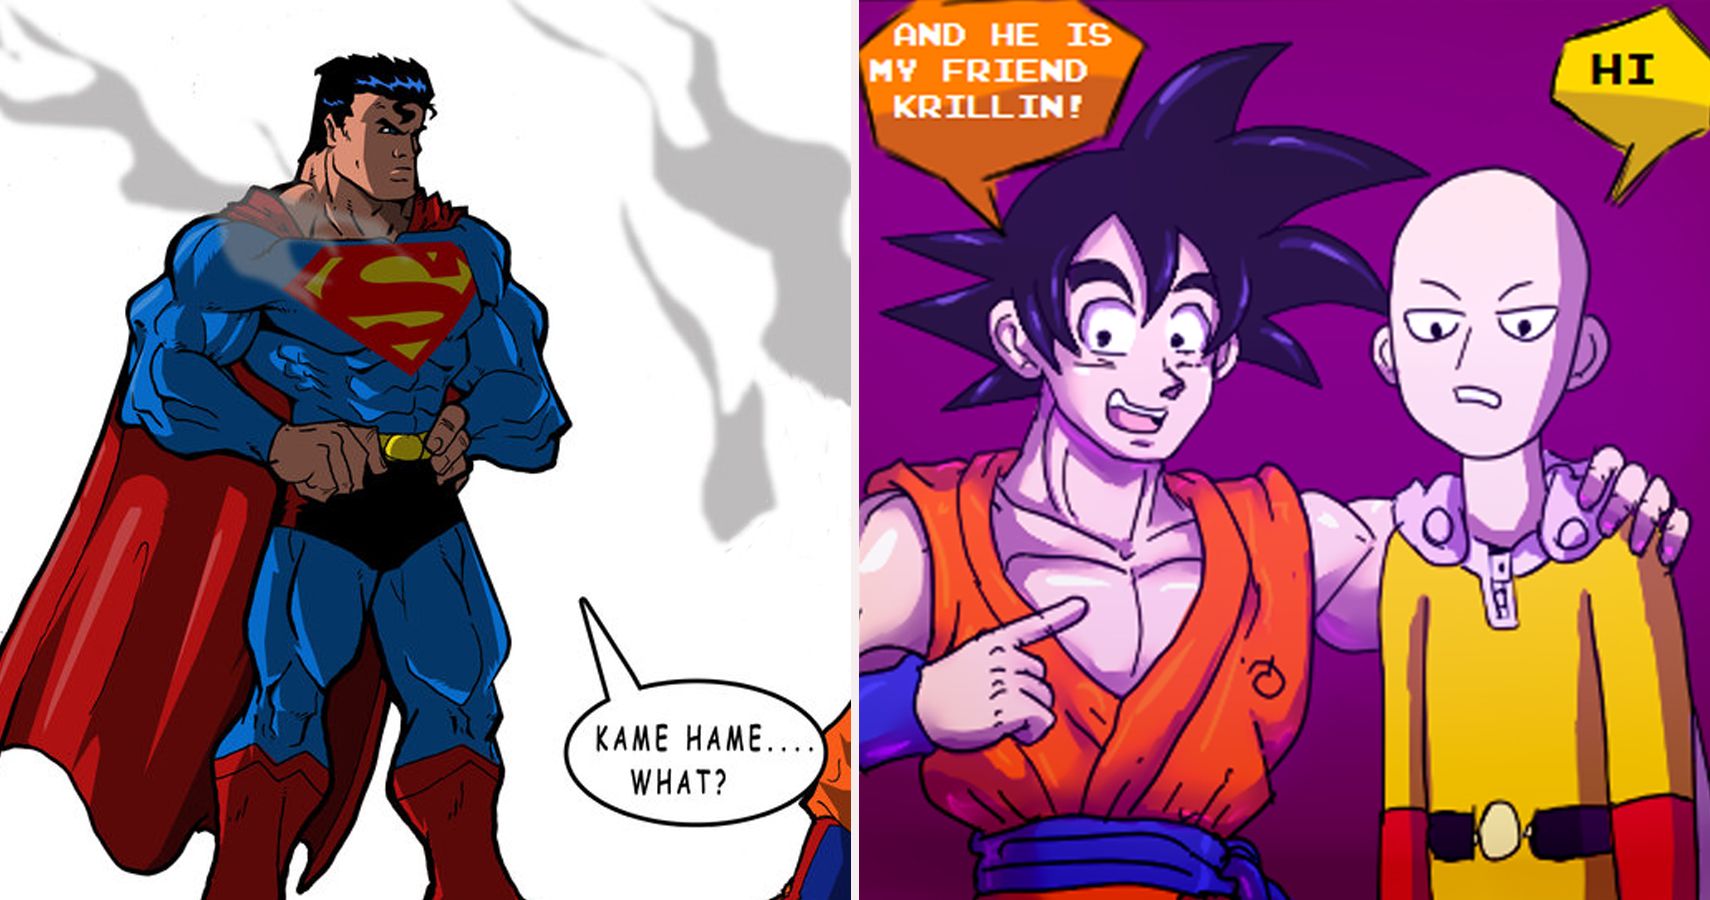 20 Goku Vs. Superman Comics That Will Leave You Laughing